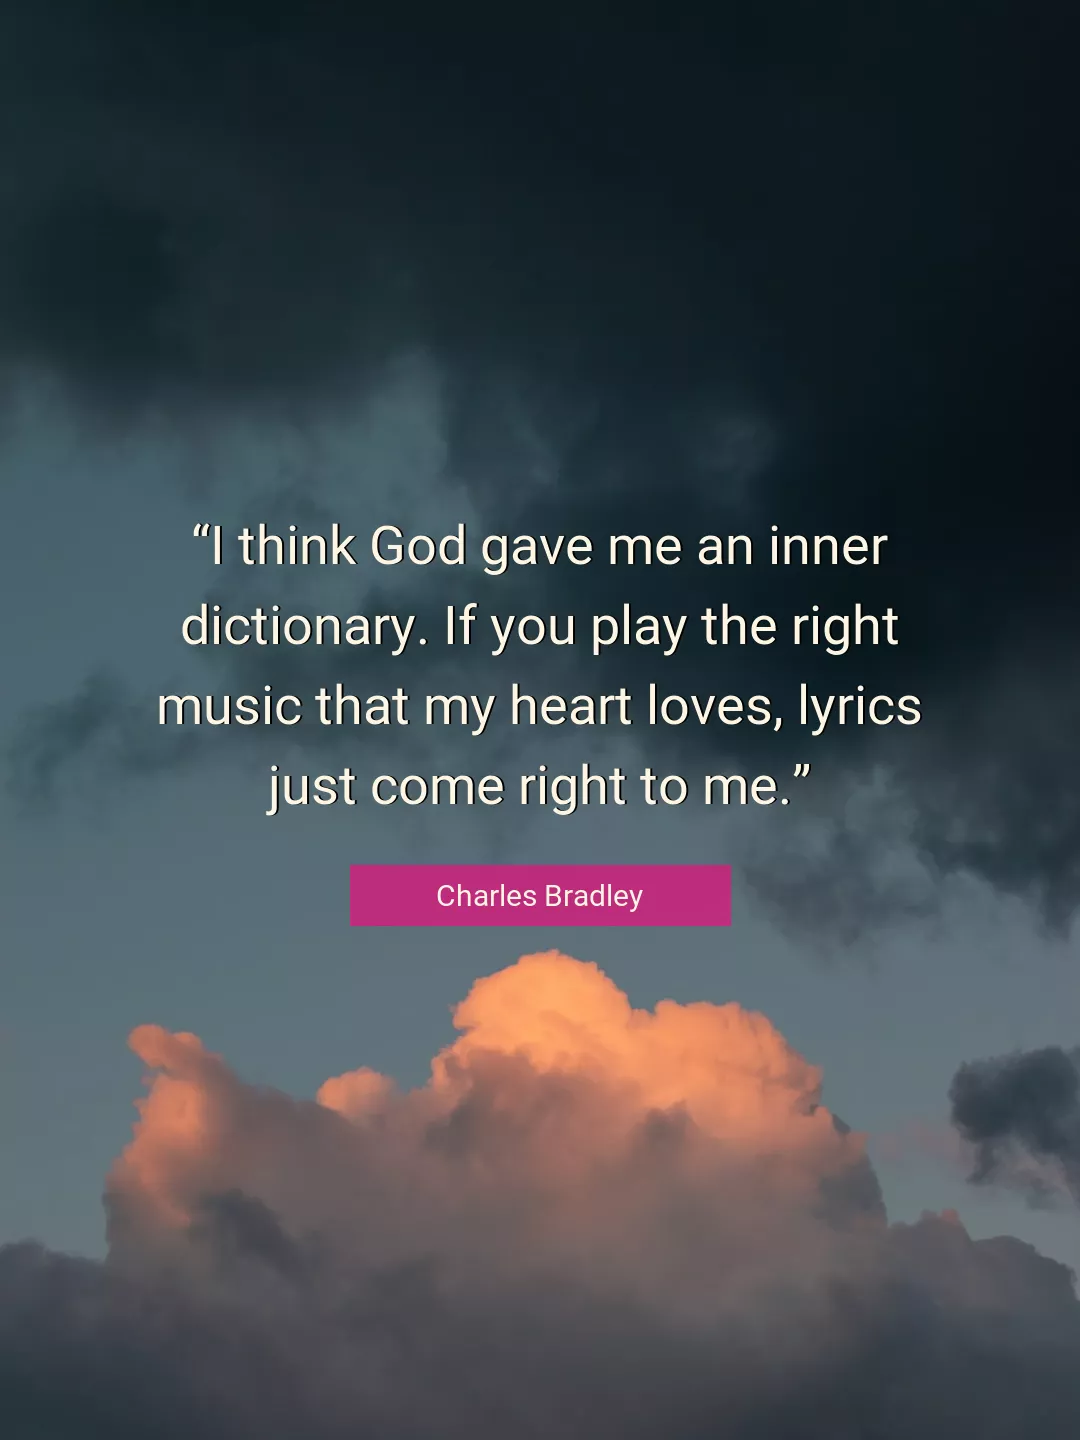 Quote About God By Charles Bradley